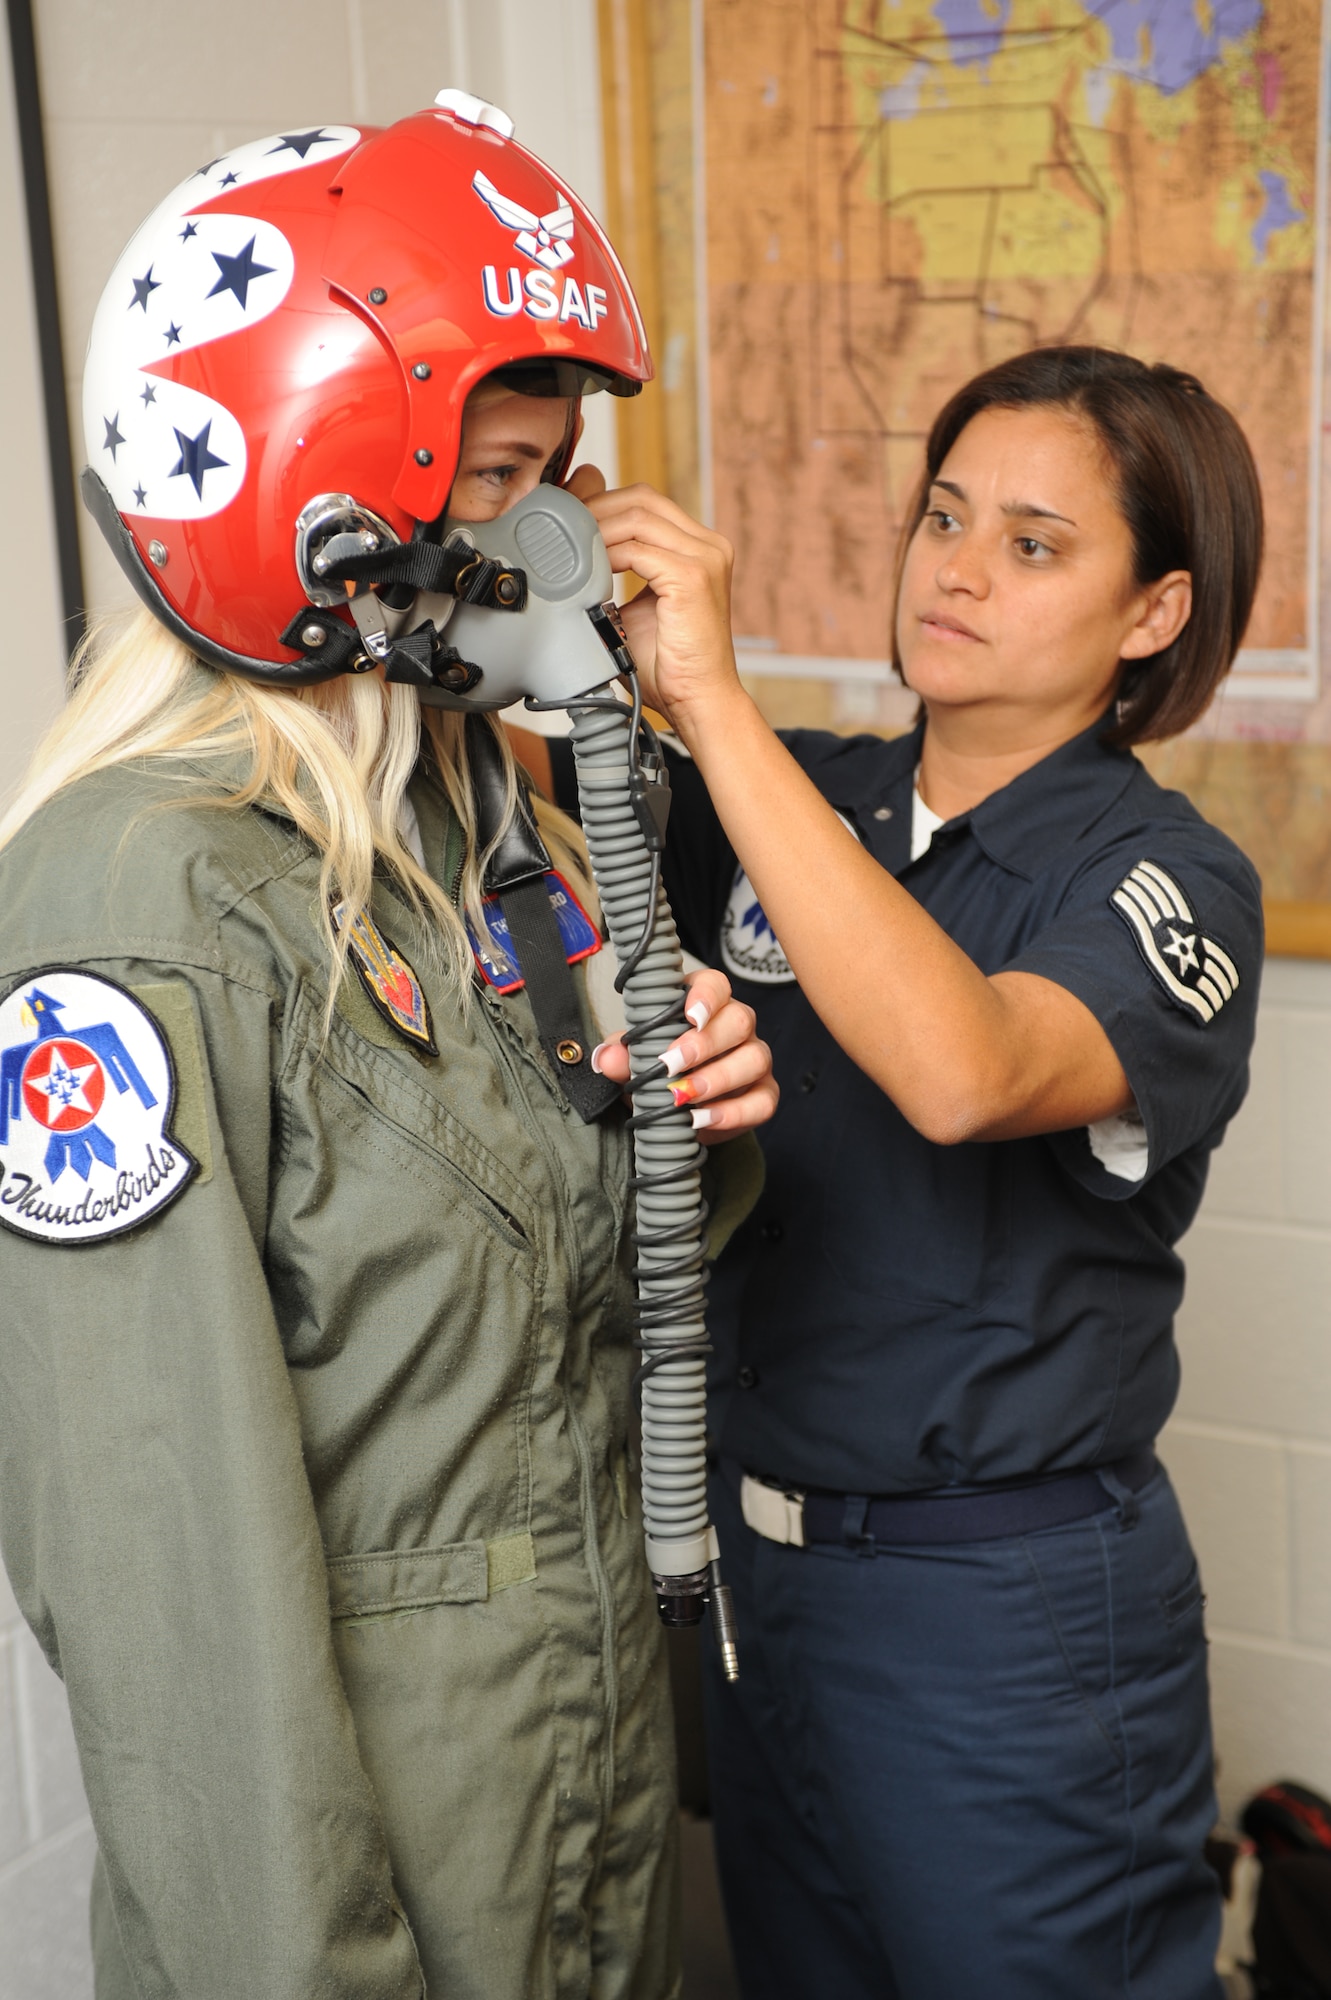 Staff Sgt. Robbin Bailon (right), Thunderbirds flight equipment technician, adjusts a helmet and face mask on Megan Funk during her flight suit fitting June 4 at Hill Air Force Base, Utah. Mrs. Funk was selected as a Hometown Hero for her volunteer service to the community and received a flight in a Thunderbird F-16 Fighting Falcon. (U.S Air Force photo by Tech. Sgt. Russ Martin)